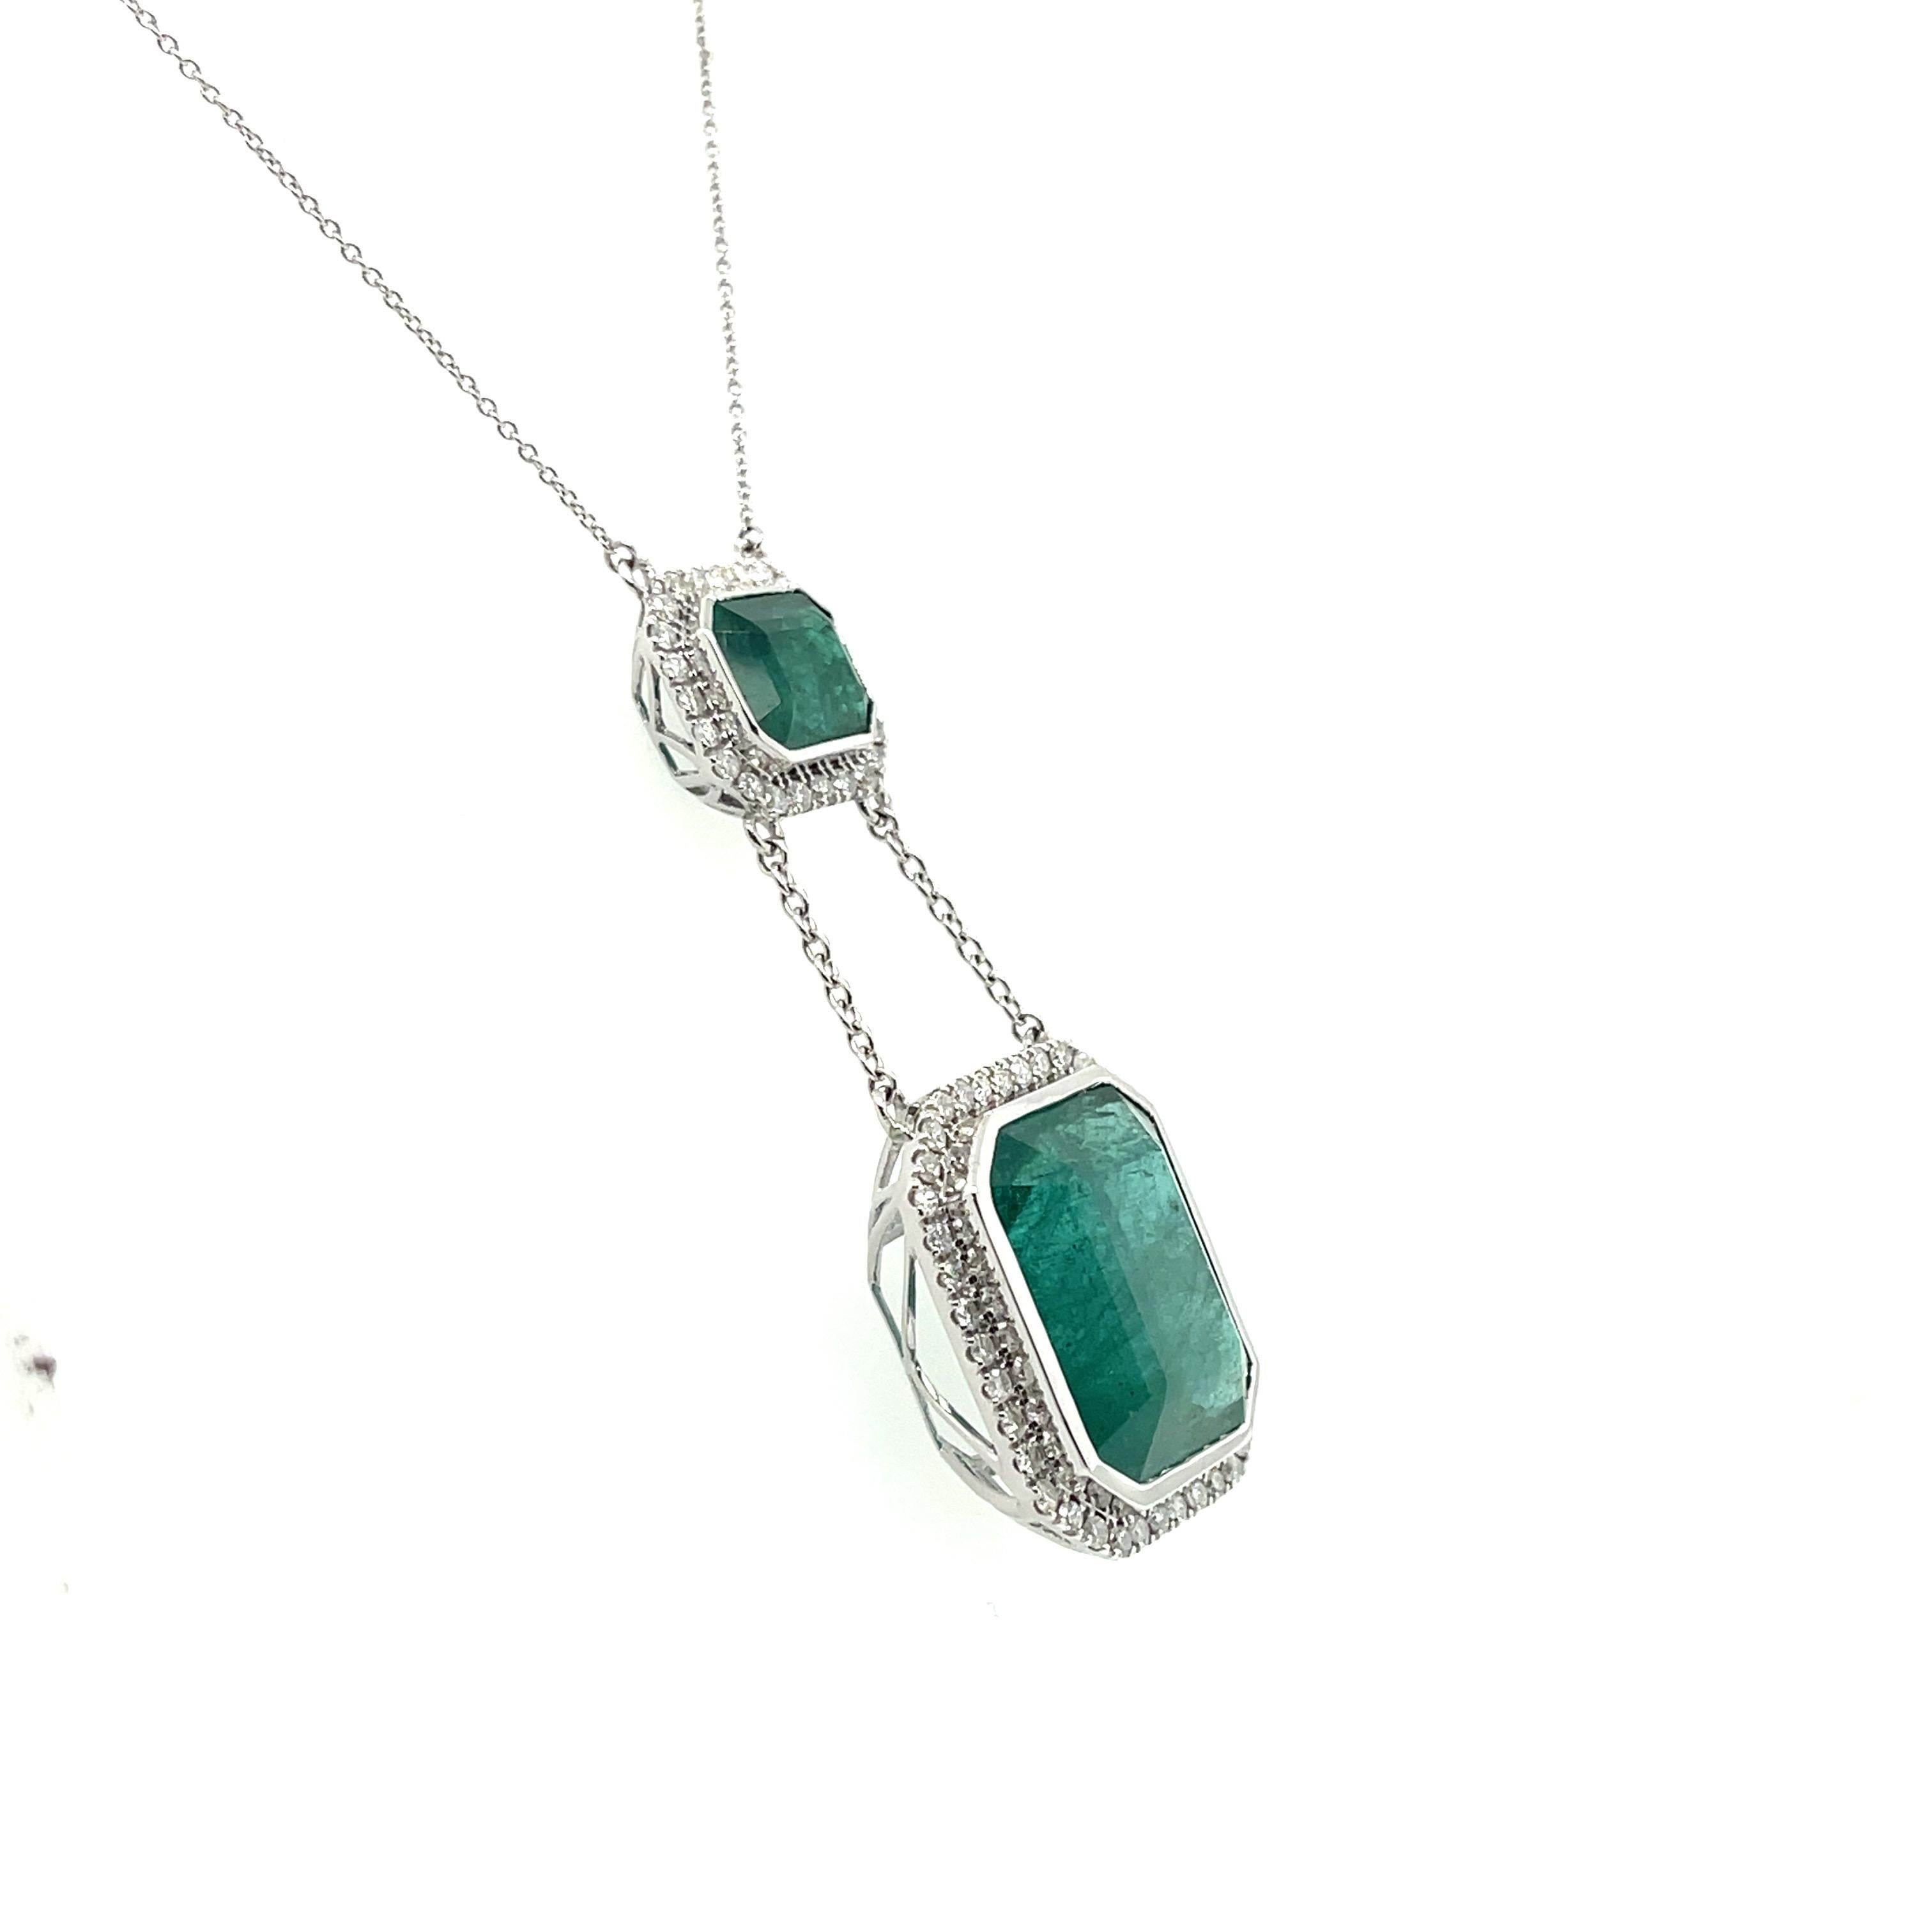 Natural Emeralds and Diamonds, crafted into a beautiful double drop pendant and diamond necklace, complimented by a stunning polished finish design.

Two Emeralds, 24.17ct ctw, 9.82mm x 8.08mm x 6.08mm - 17.67mm x 14.75mm x9.64mm *estimated whilst